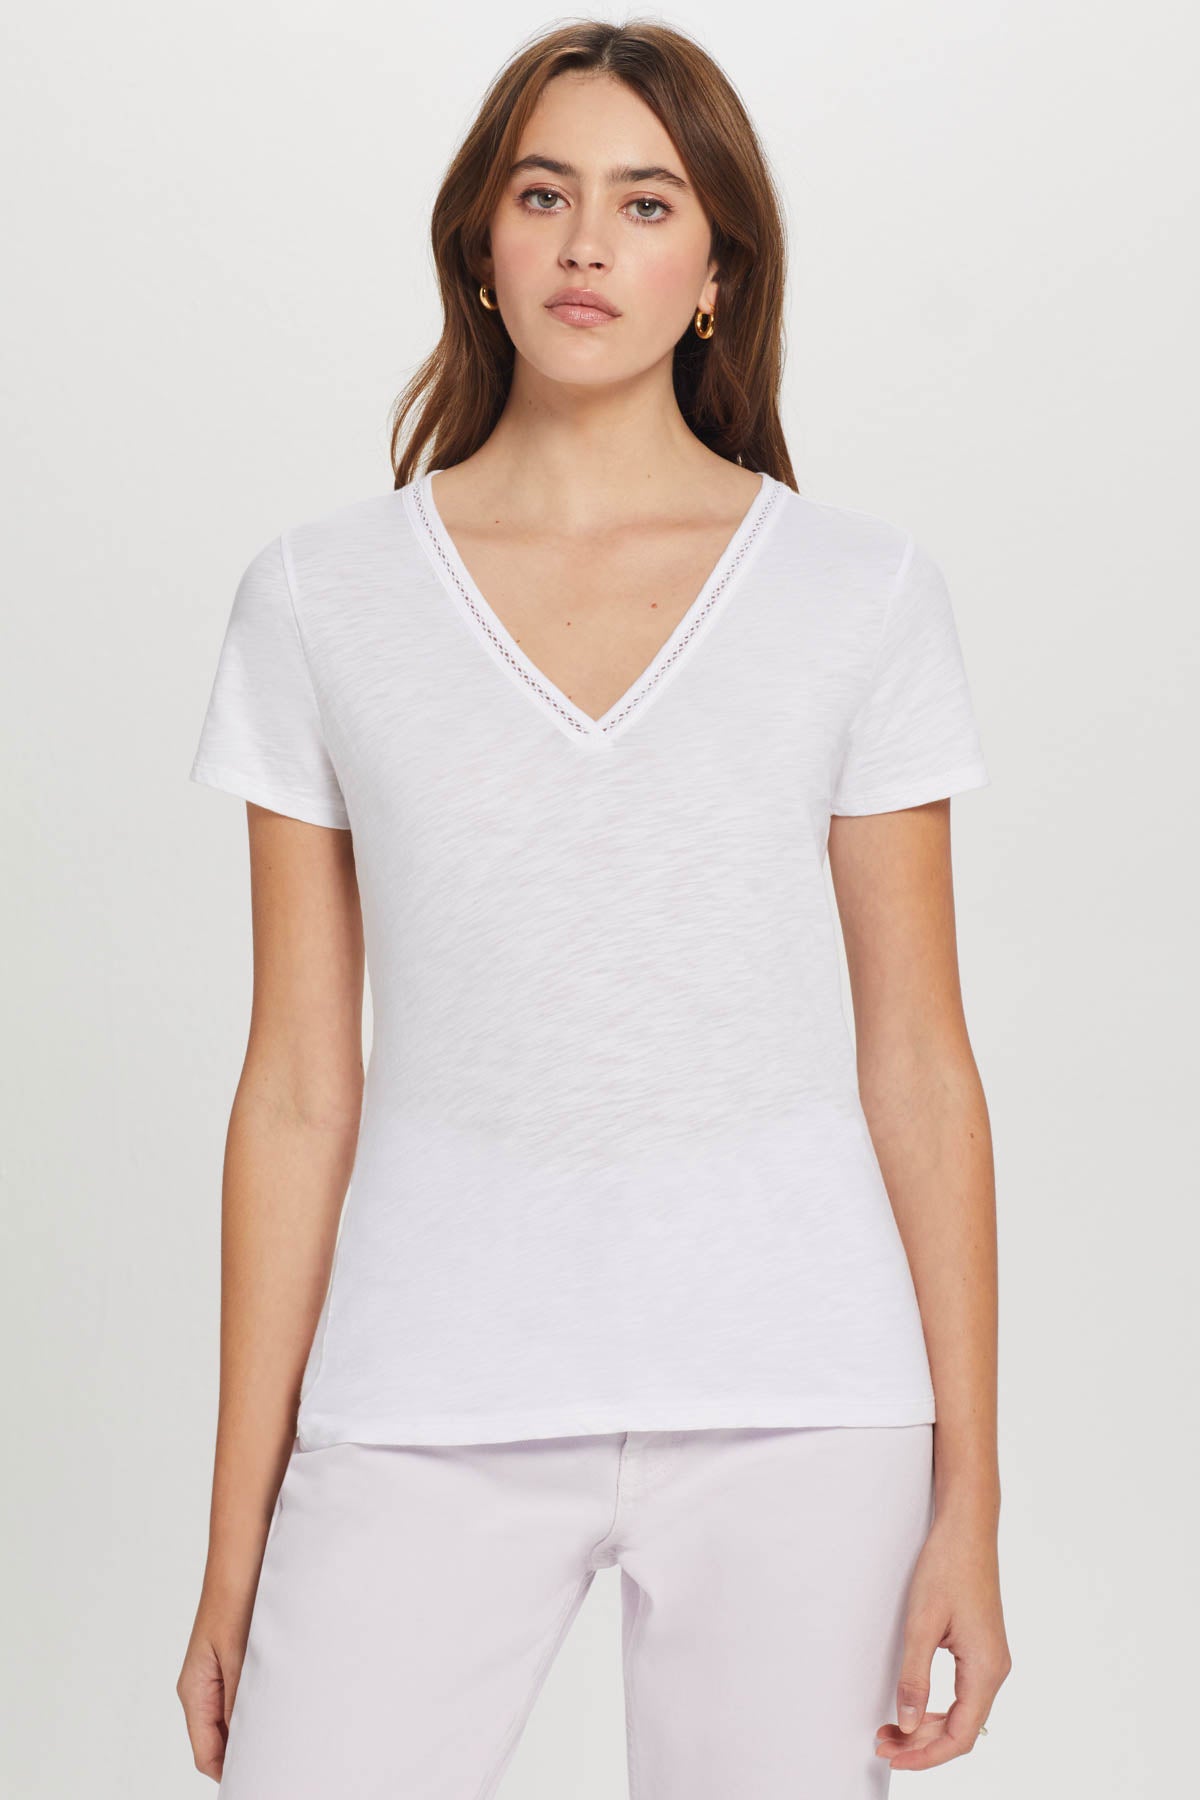 Honor Embroidered V Neck Tee - Goldie Lewinter